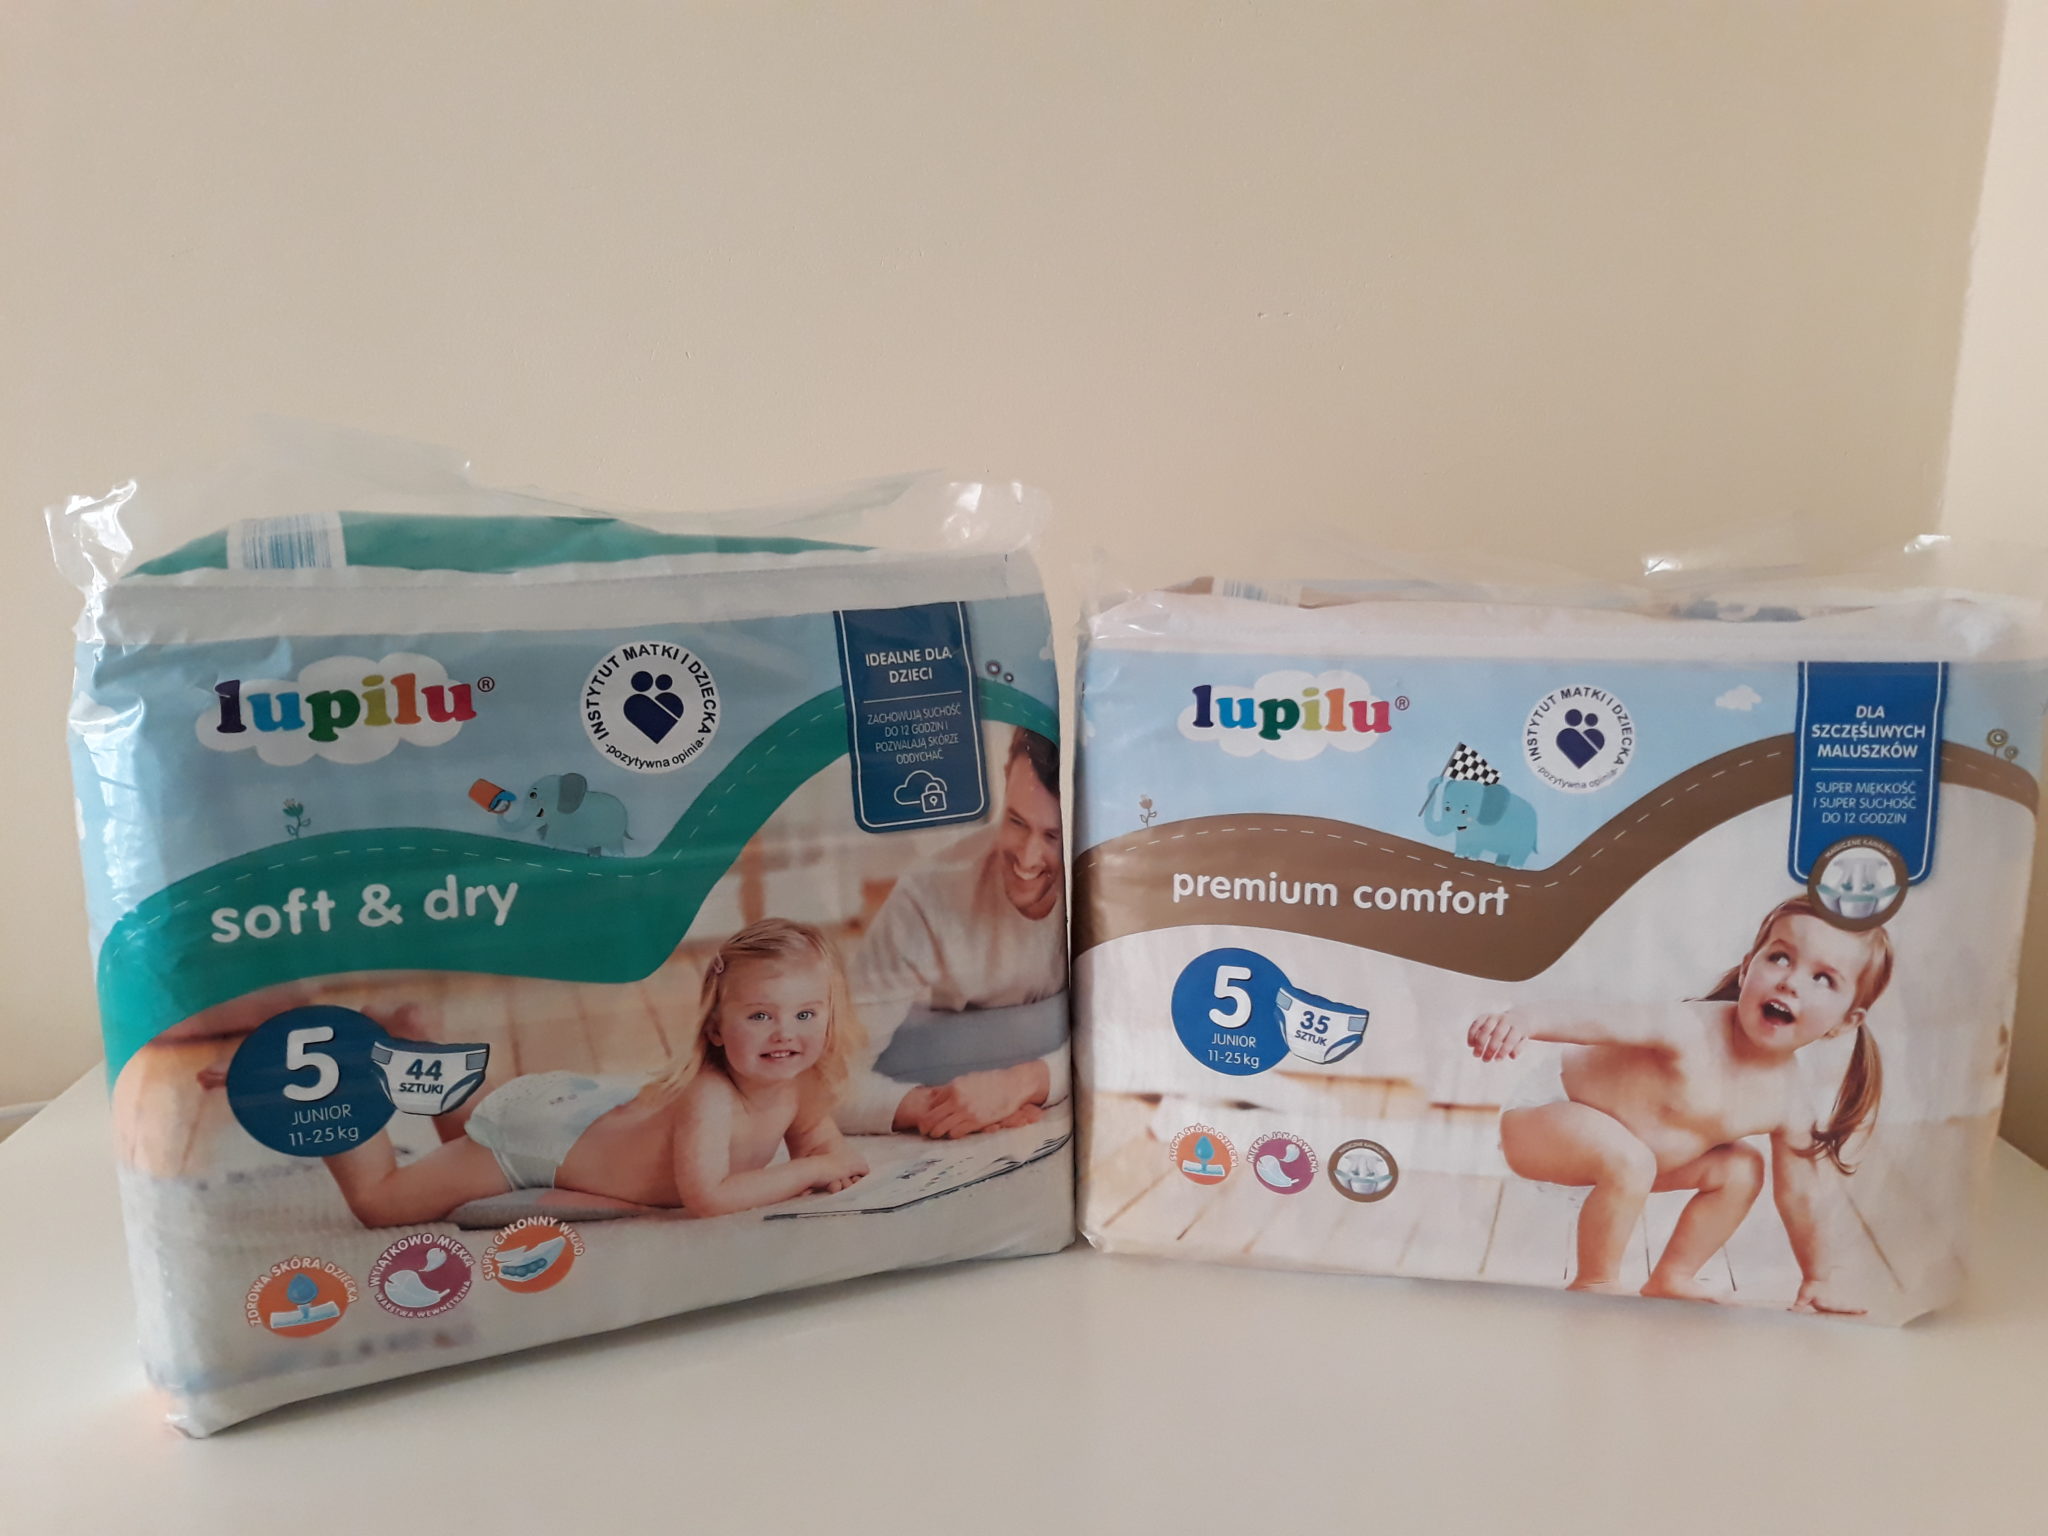 pieluchy pampers active baby mega box plus 5